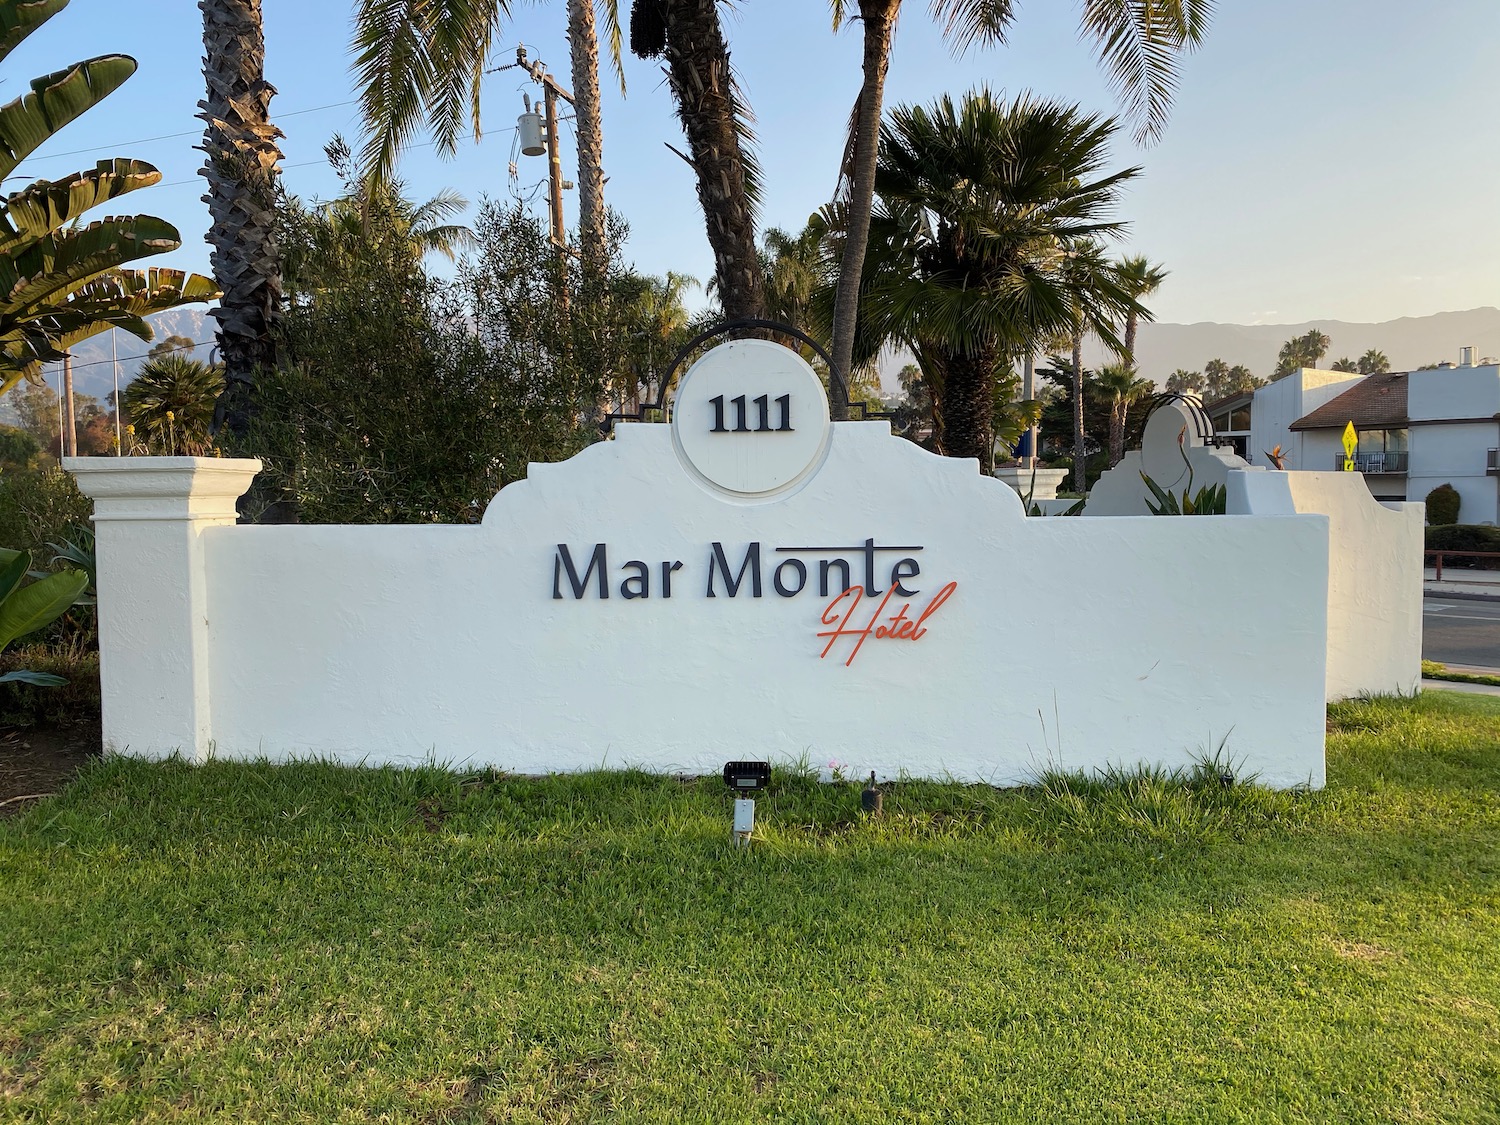 Mar Monte Hotel Review